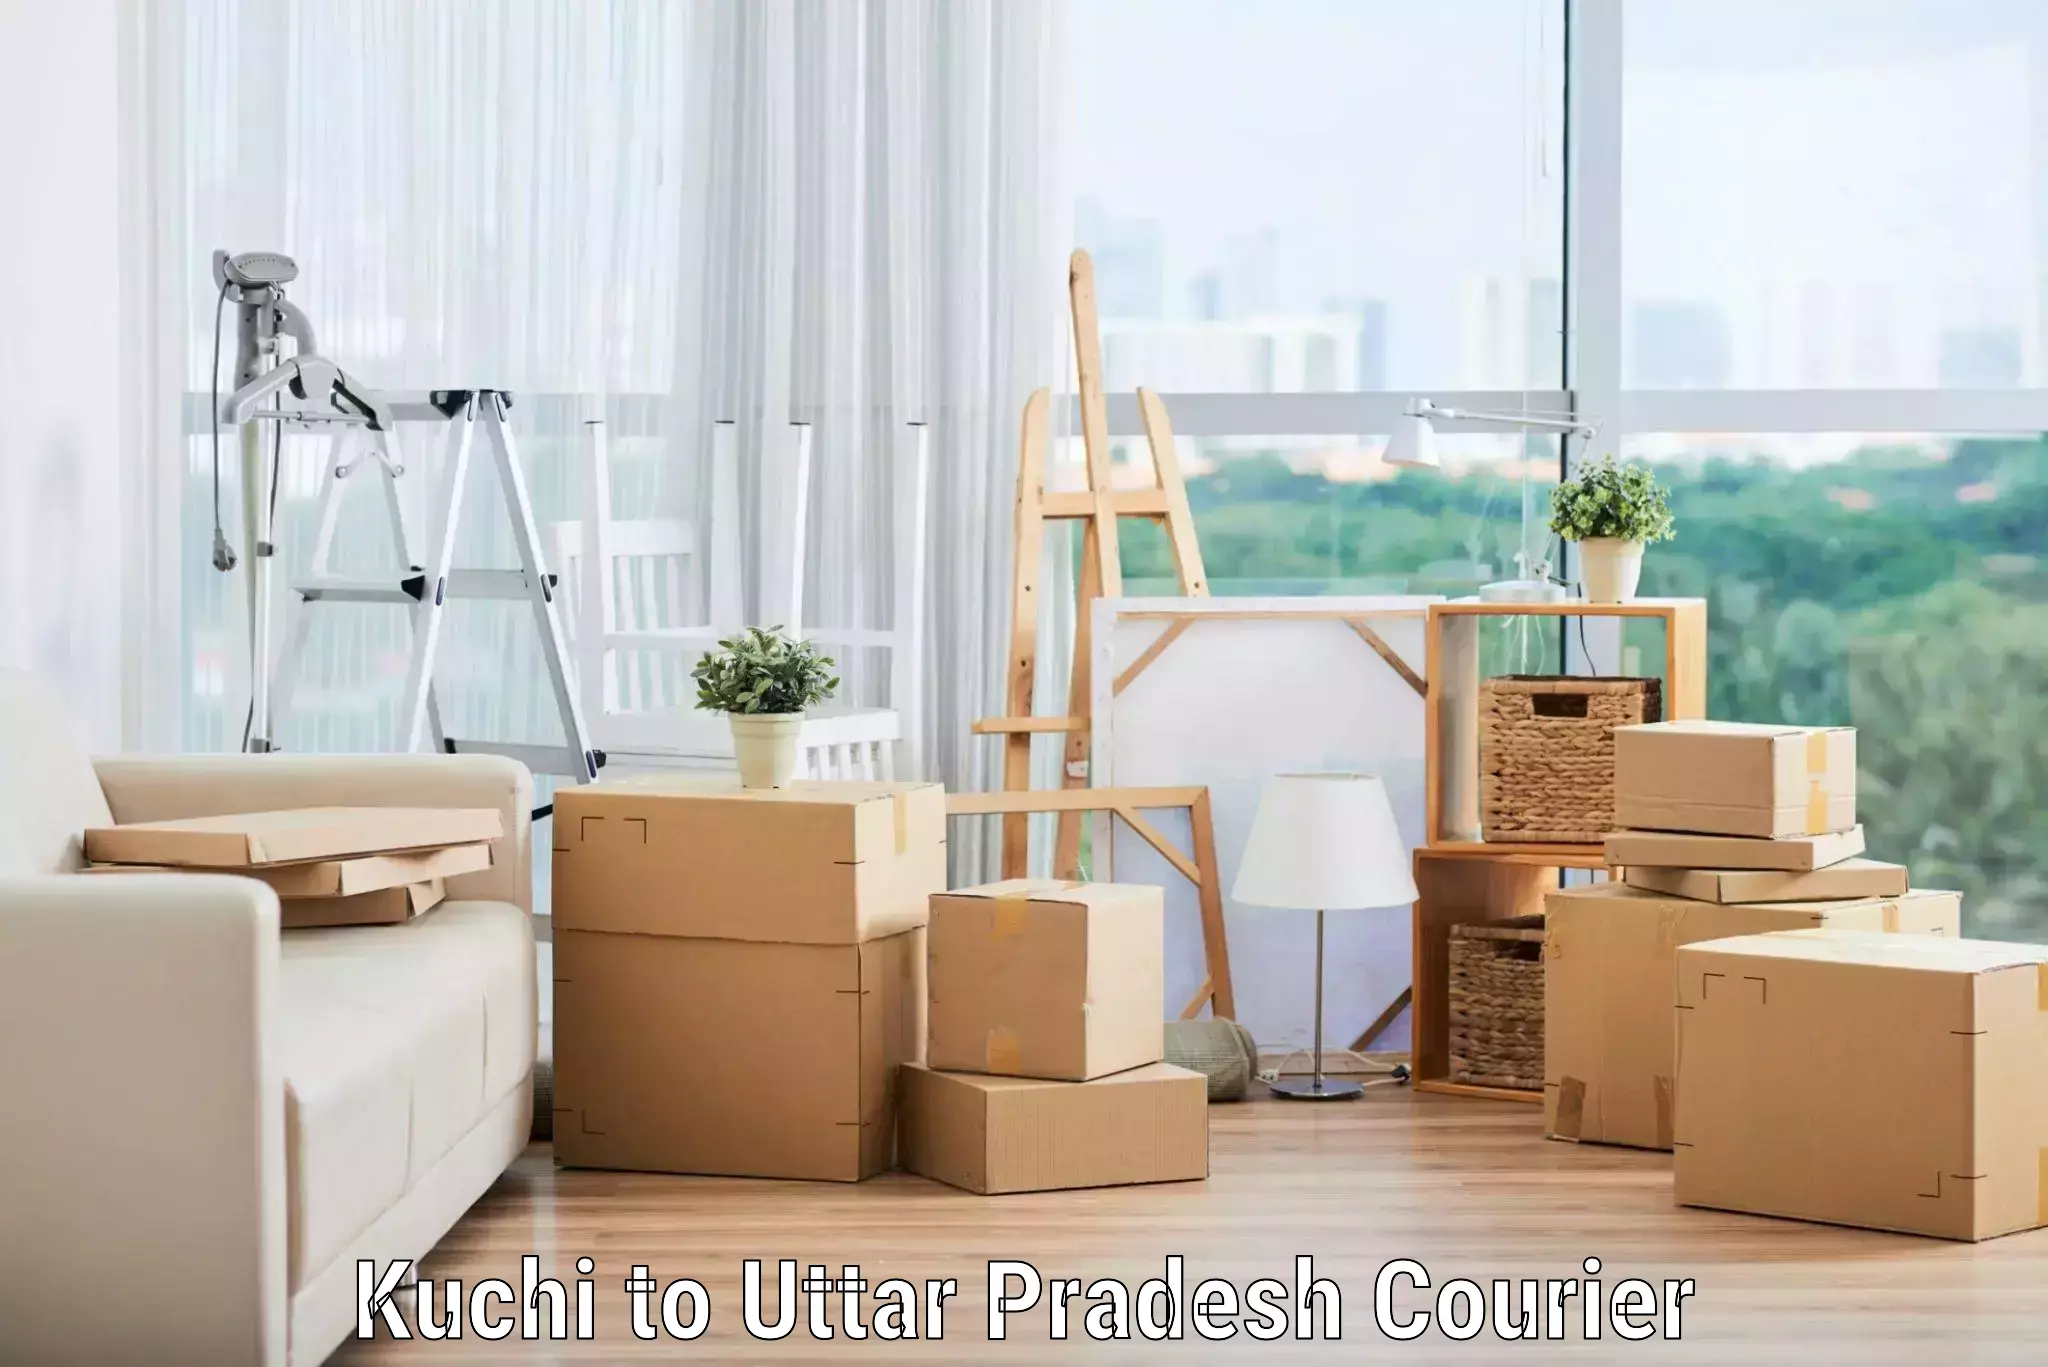 Professional movers Kuchi to Lucknow